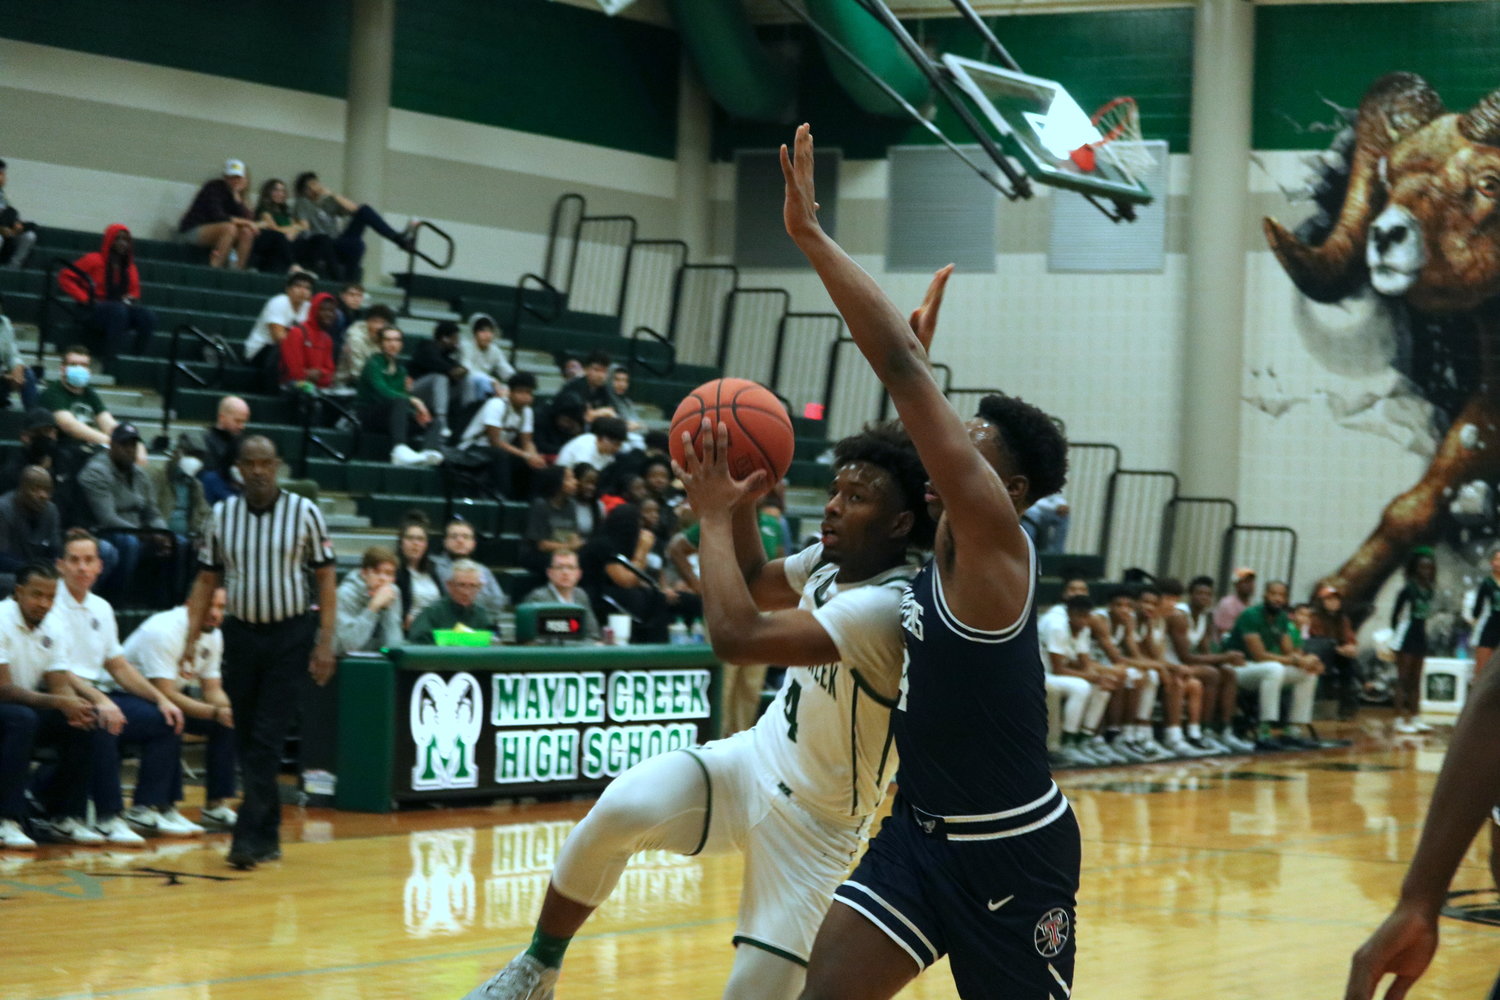 Angel Sonnier drives to the basket during Wednesday’s game between Mayde Creek and Tompkins at the Mayde Creek gym.